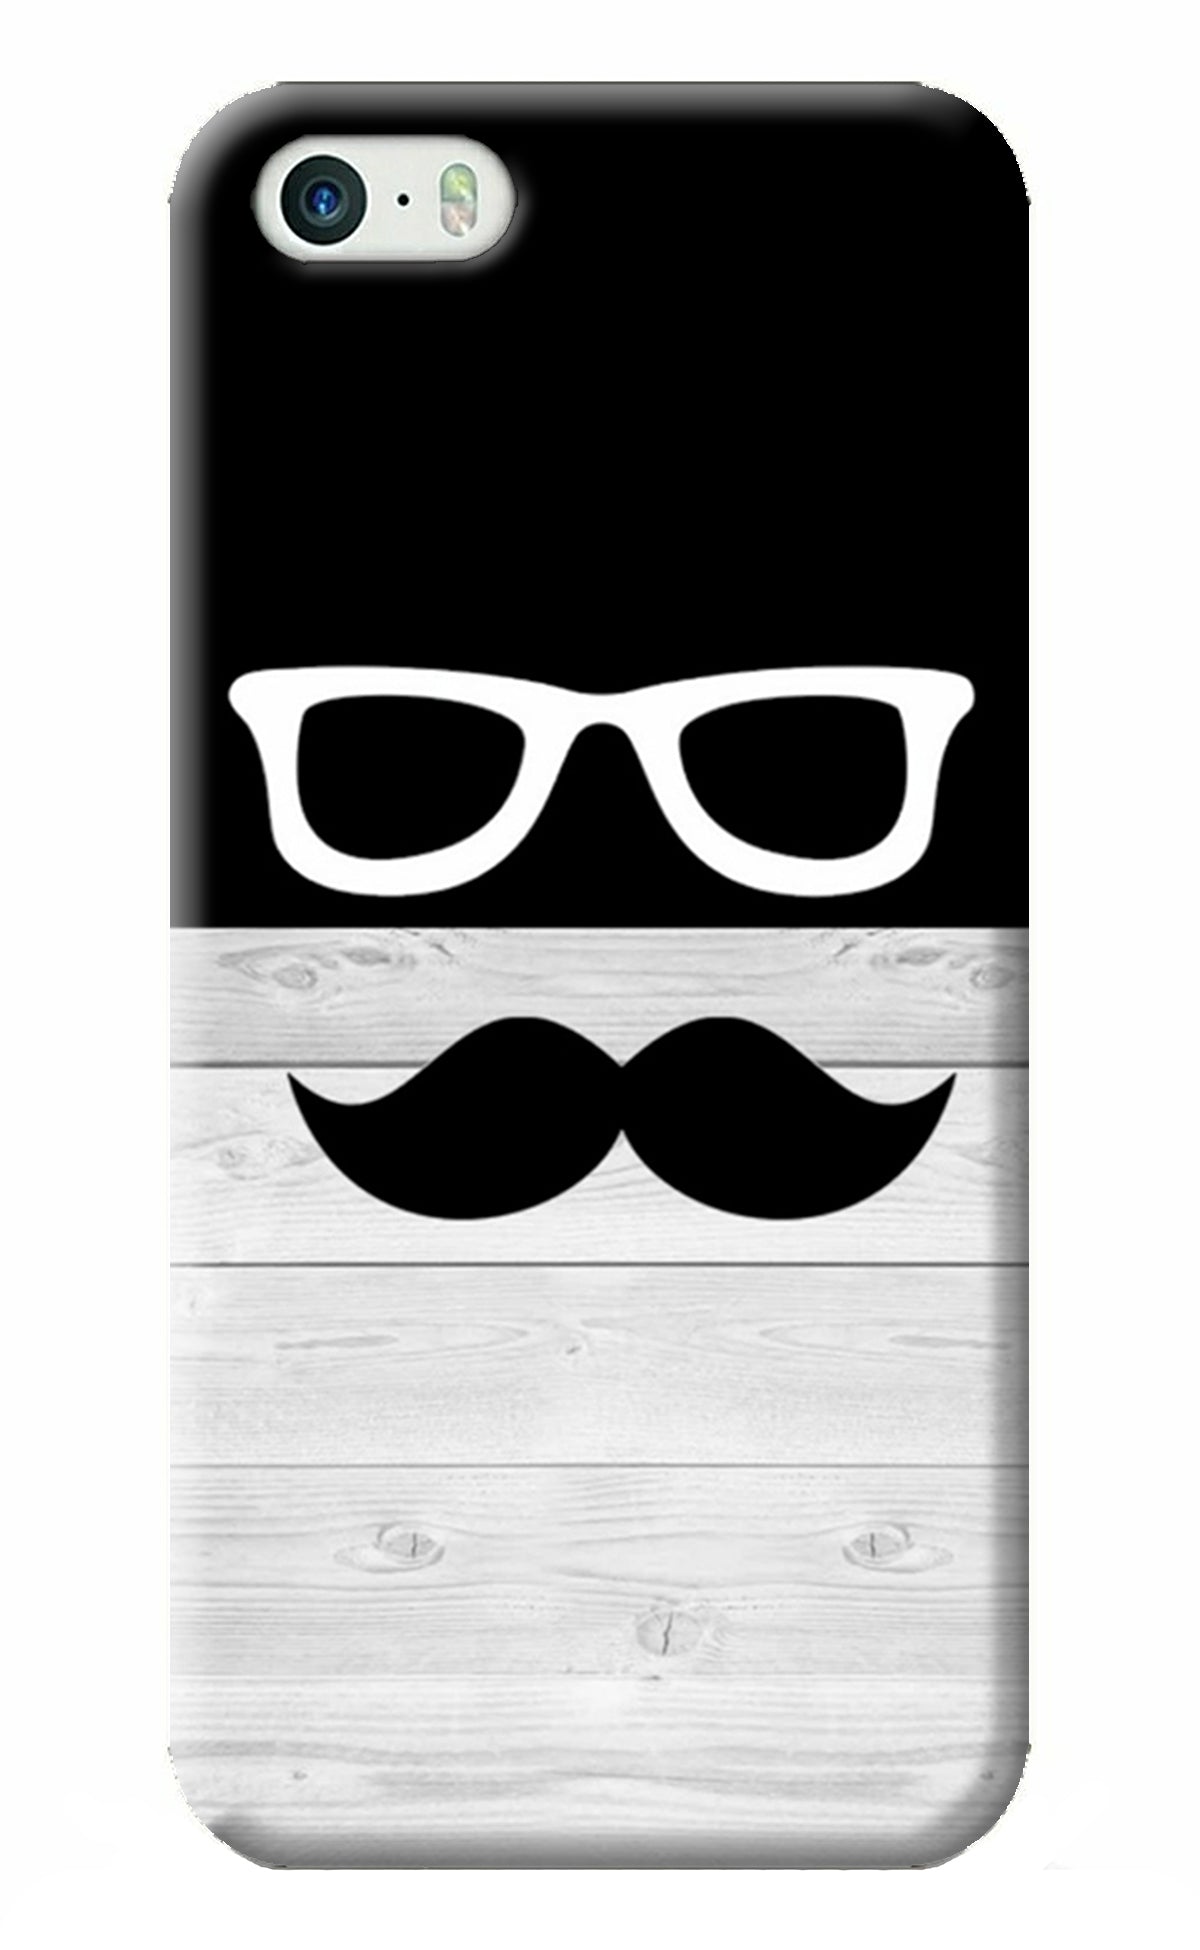 Mustache iPhone 5/5s Back Cover